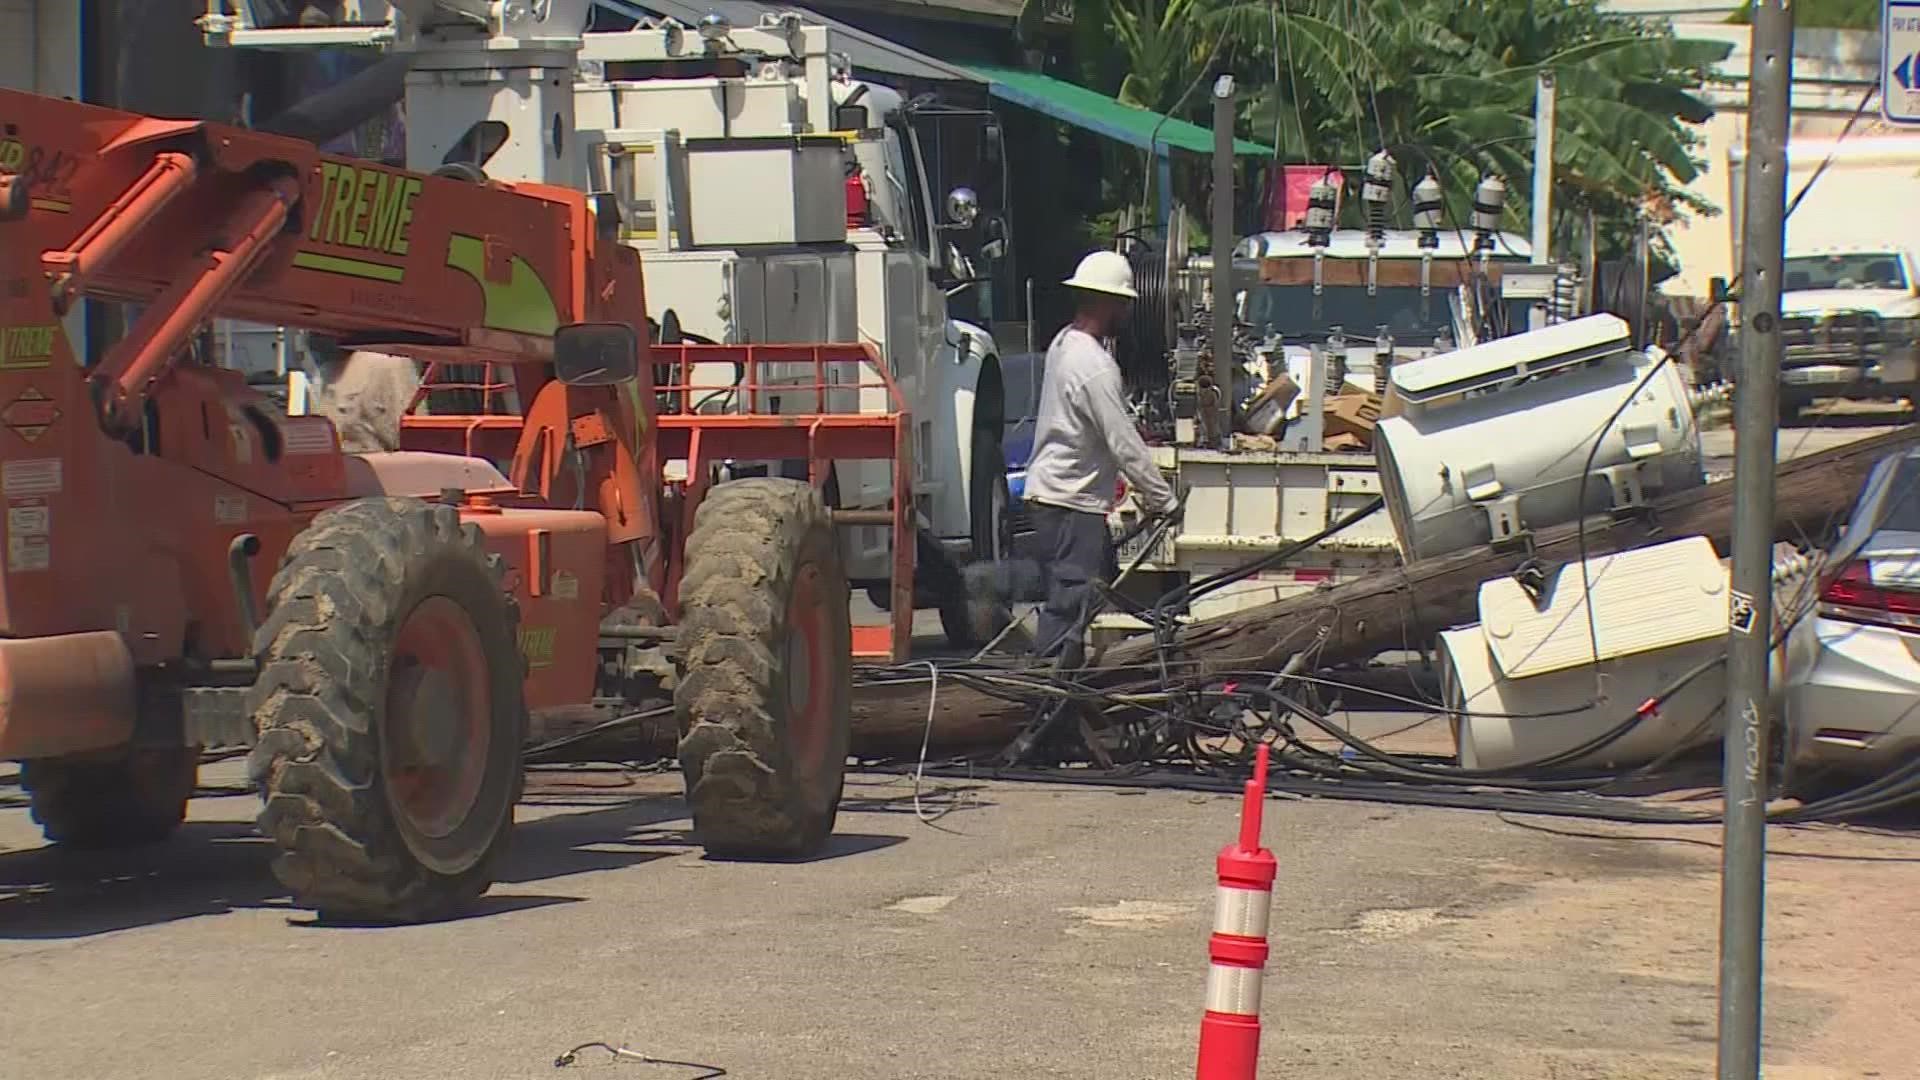 A forklift got caught in a power line in Houston's Warehouse District Wednesday morning, knocking out power for the area and creating a dangerous mess.